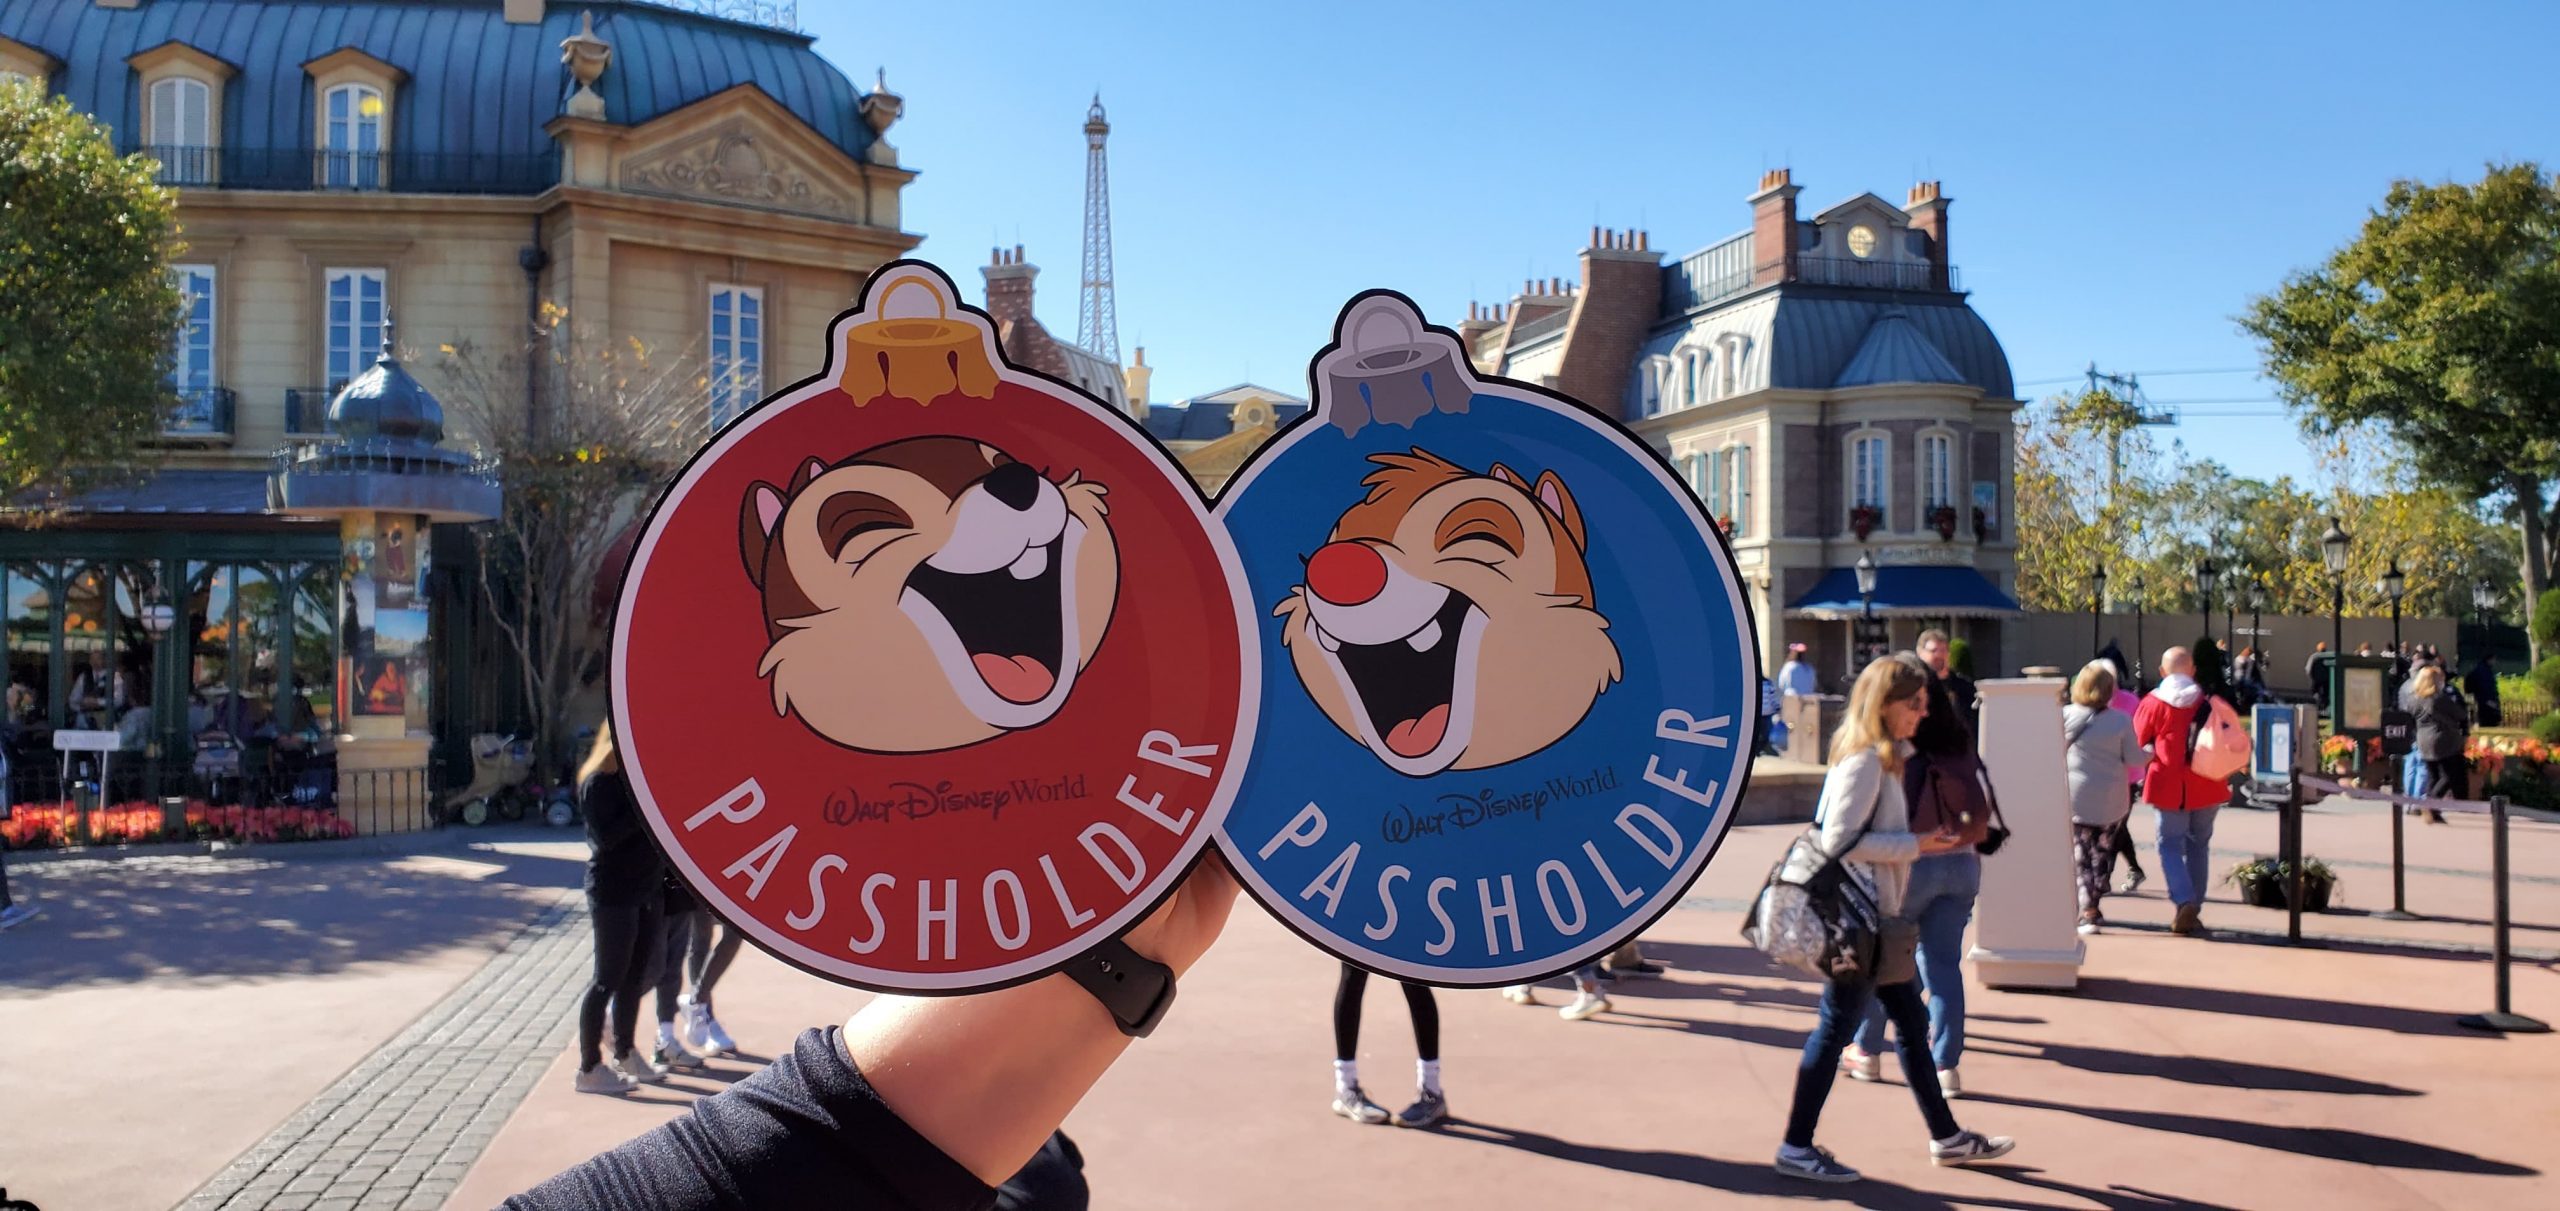 Check out the new Chip ‘n’ Dale Passholder Photo Op!